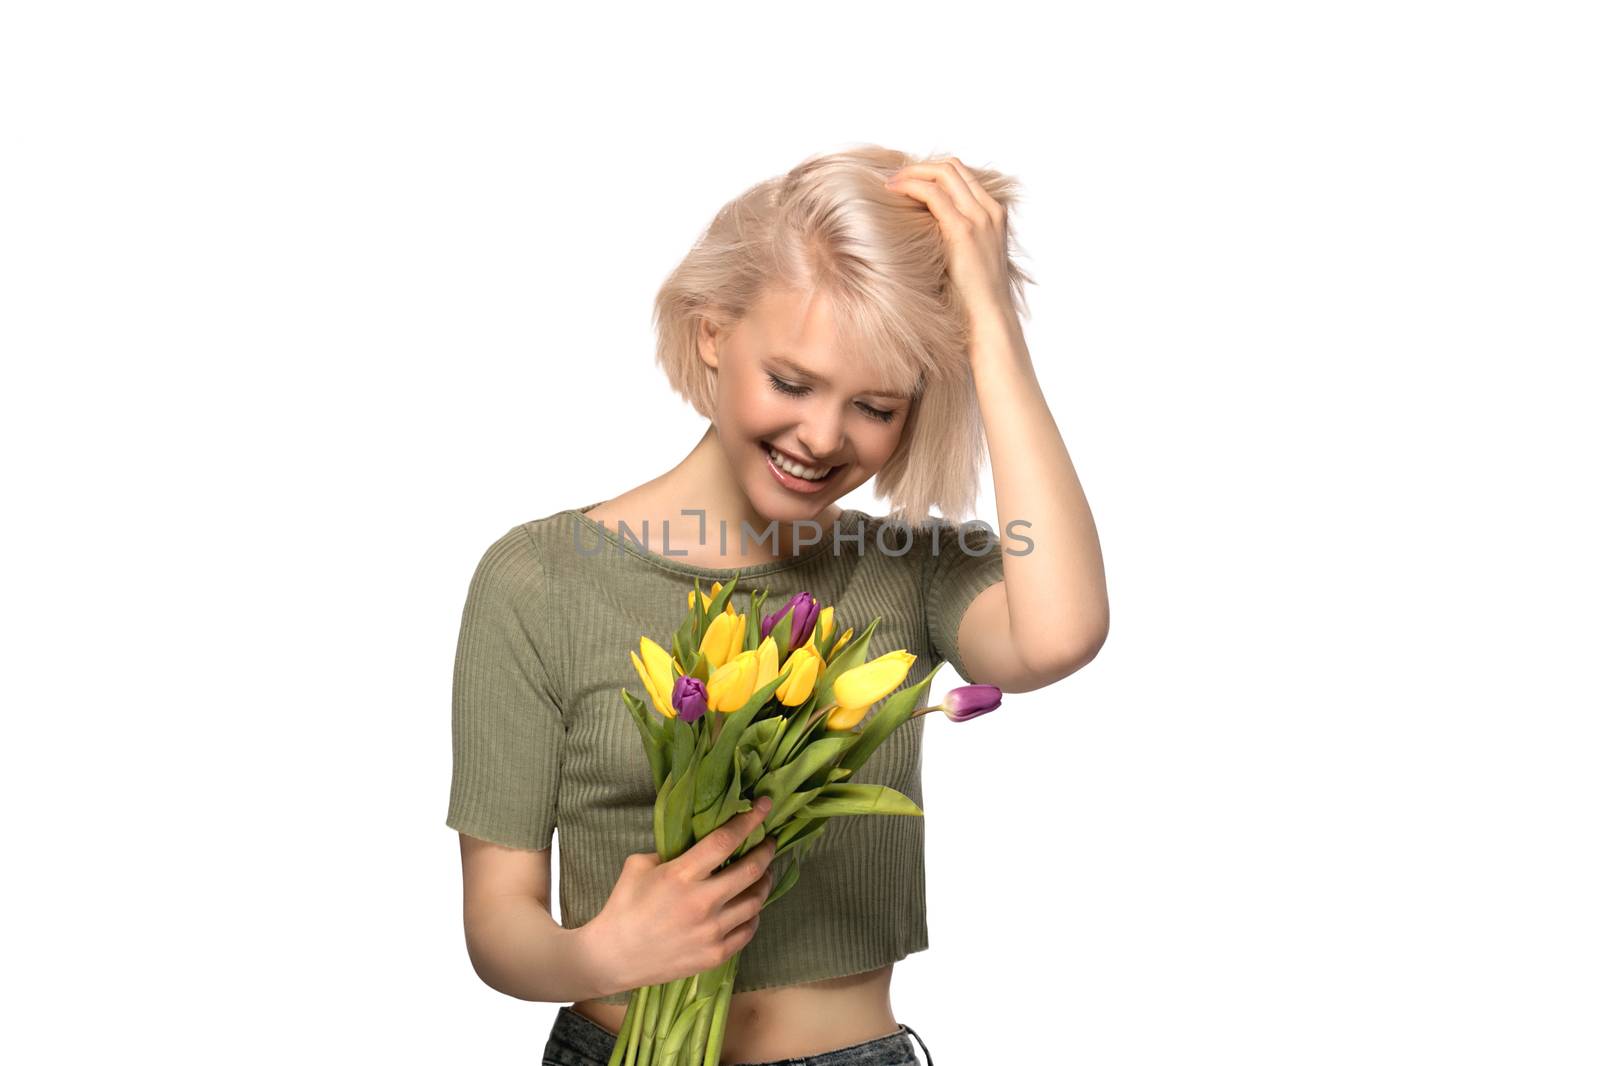 Beautiful excited smiling woman holding a bouquet of tulips isolated on white background